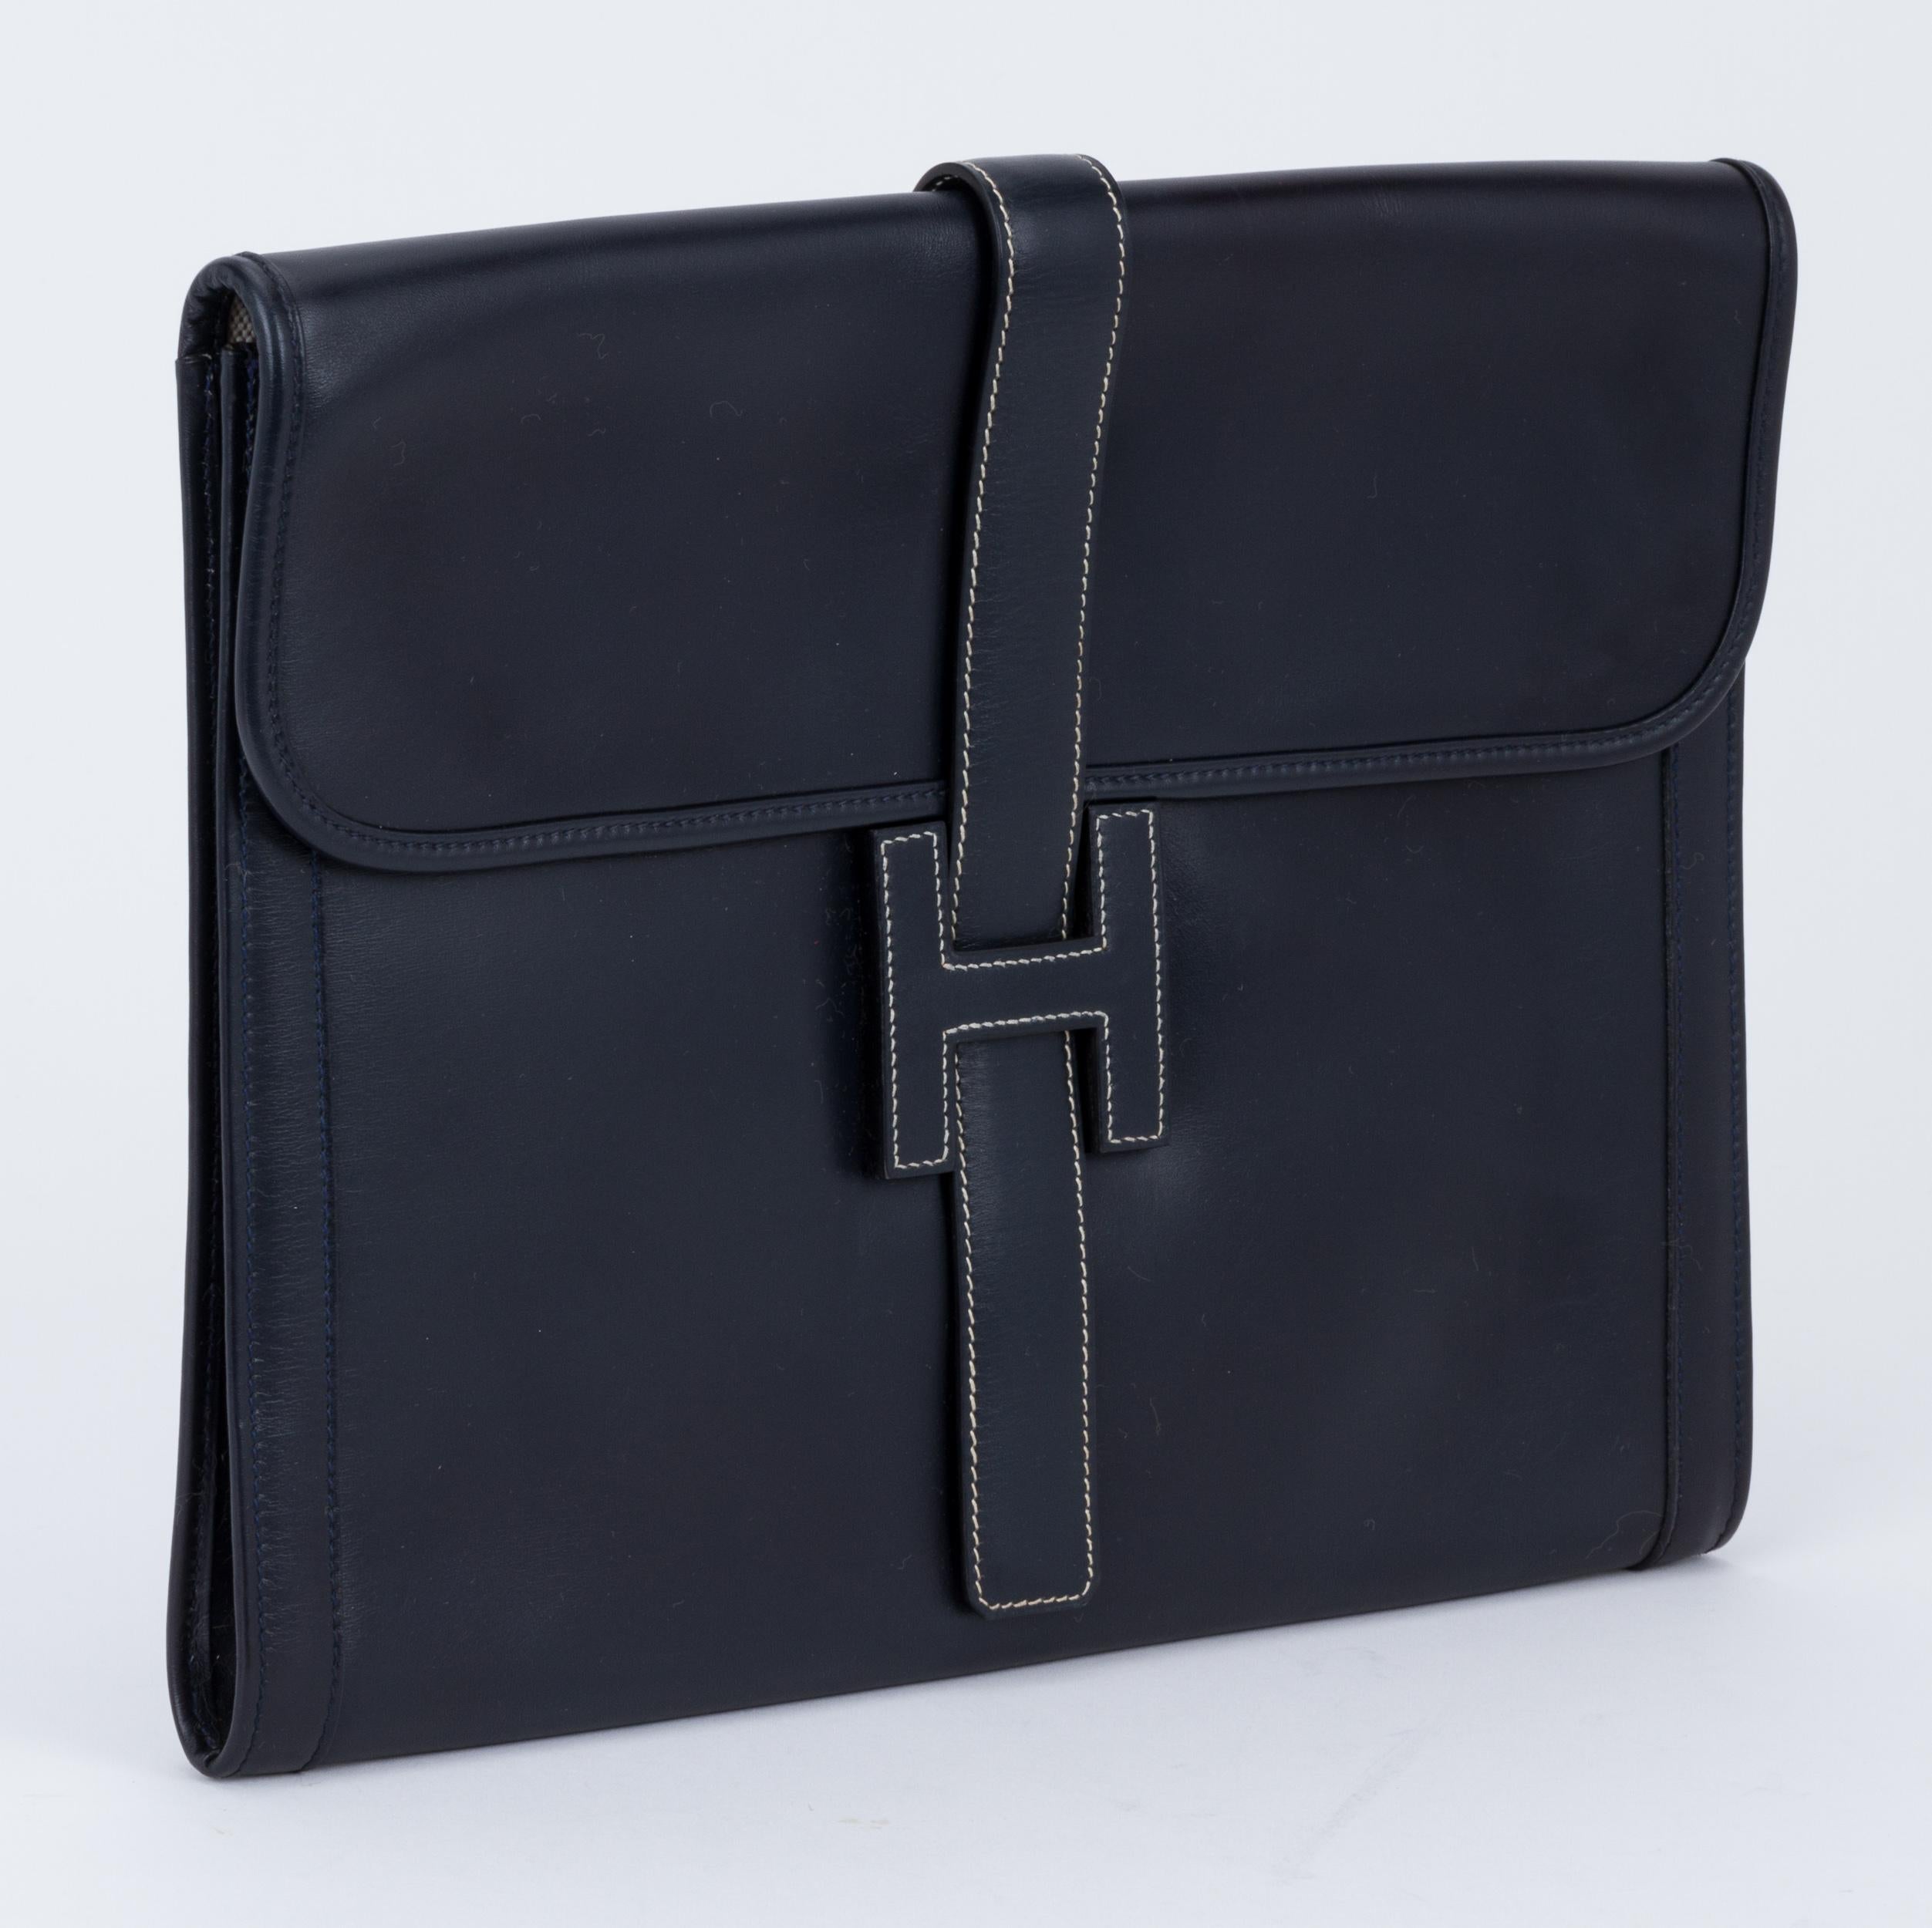 Hermès navy blue box calf leather oversize jige clutch. Contrast stitching and interior cream toile. Minor stains in the bottom interior. Minor scuffs on corners. Date stamp S for 1989. Comes with original duster.